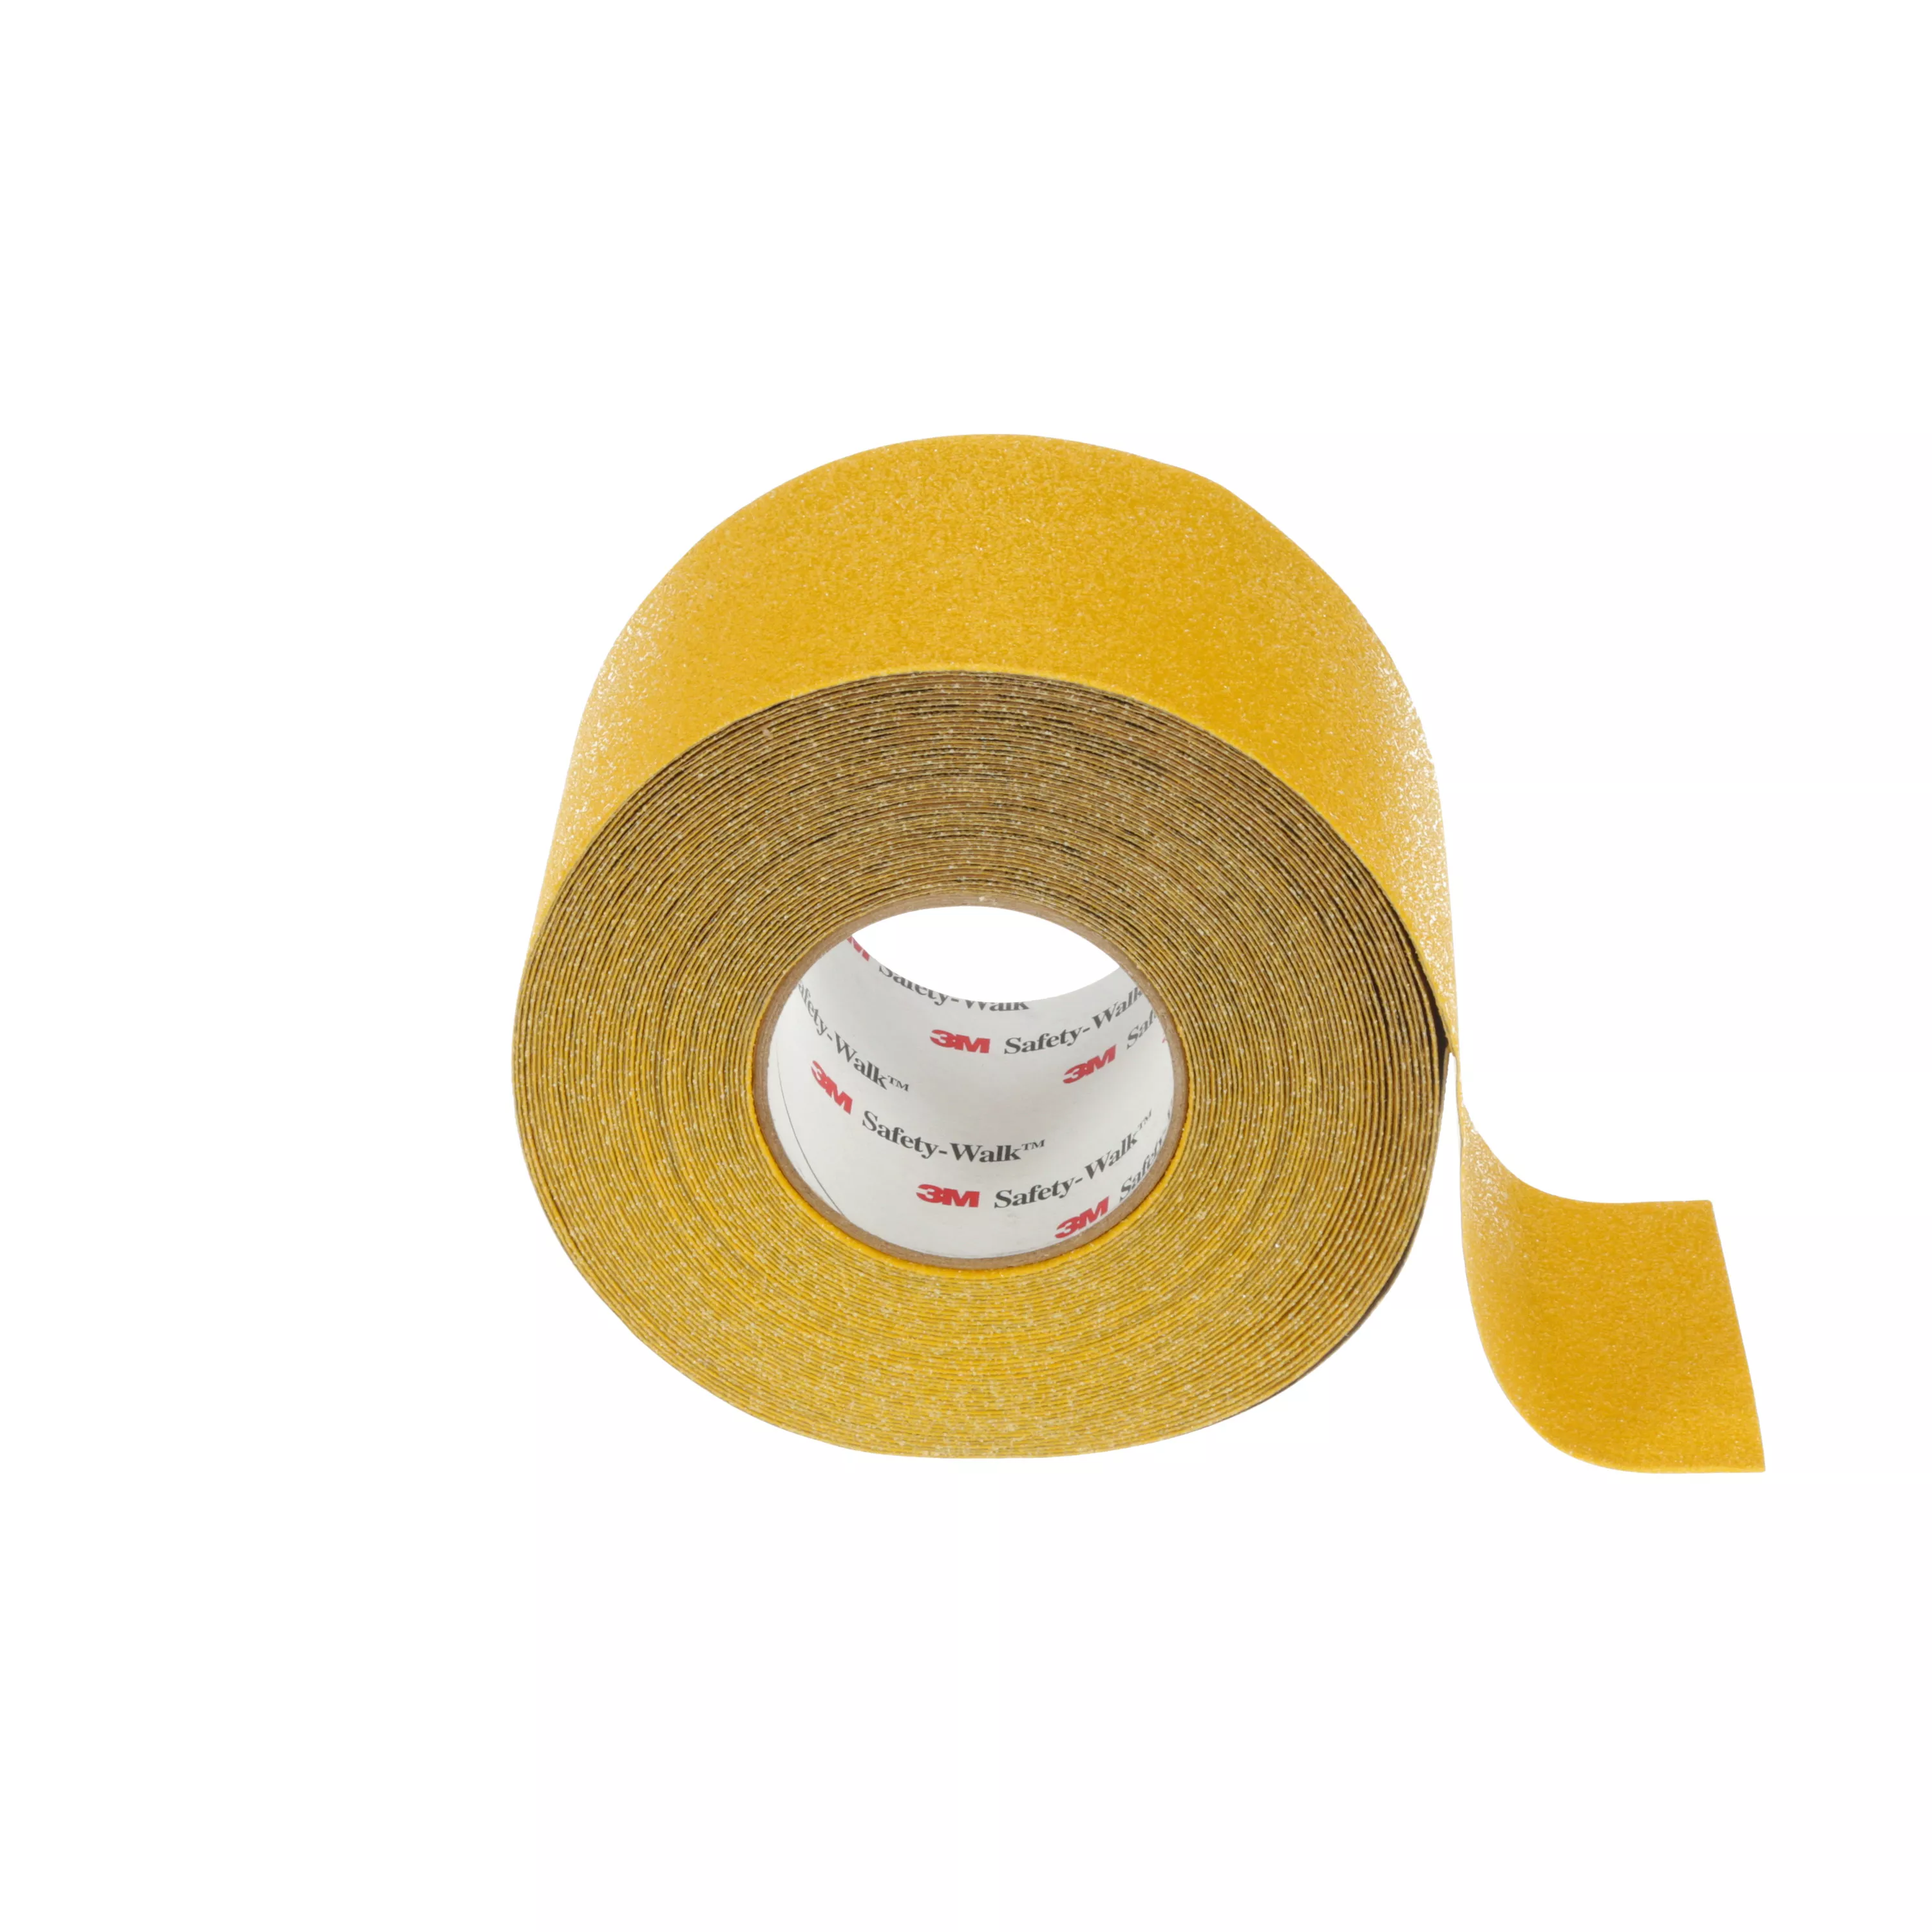 SKU 7000051949 | 3M™ Safety-Walk™ Slip-Resistant Conformable Tapes & Treads 530